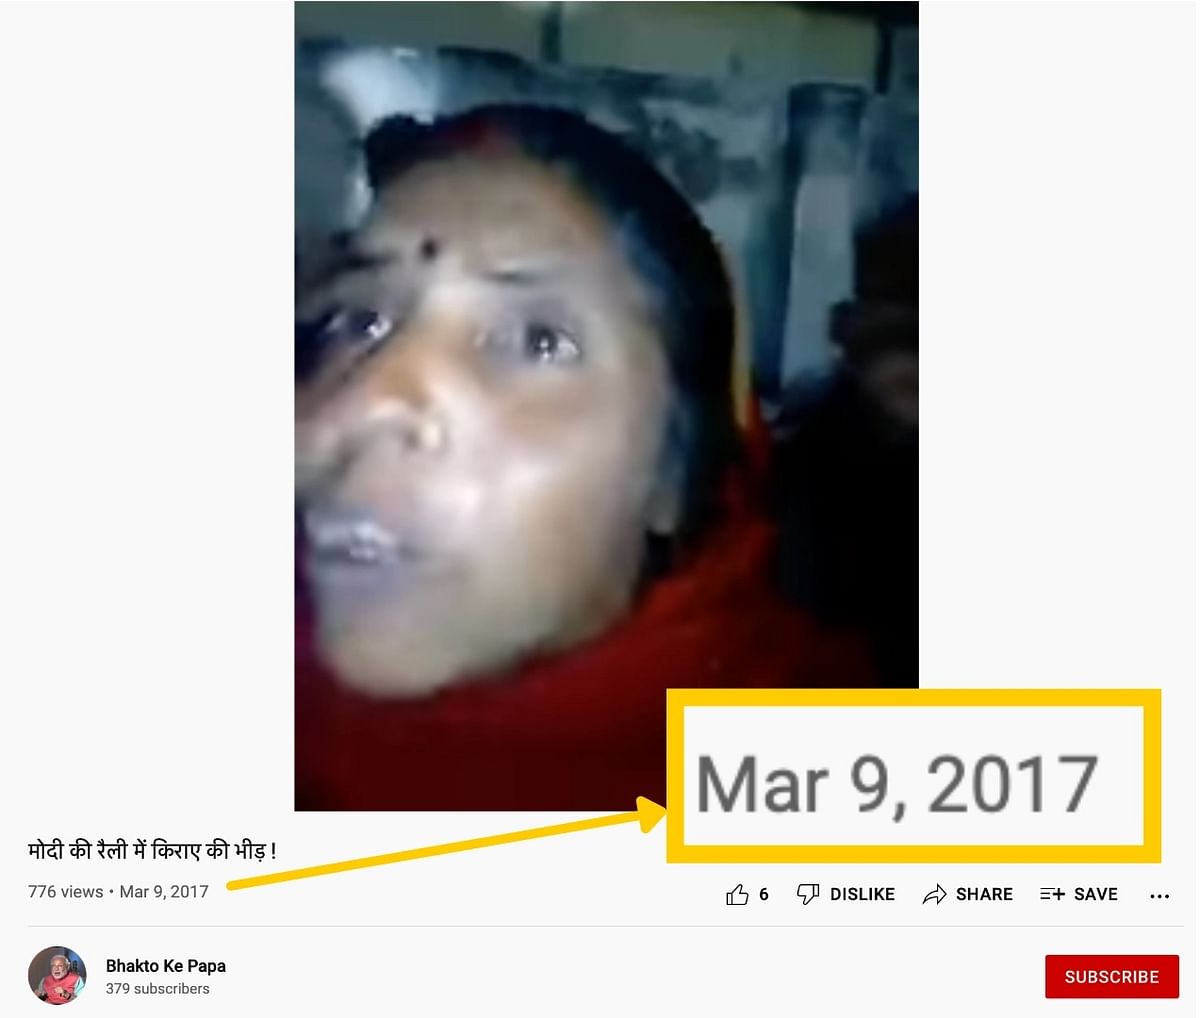 The clip has been on the internet since 2017, and social media users noted that it was from Varanasi, Uttar Pradesh.